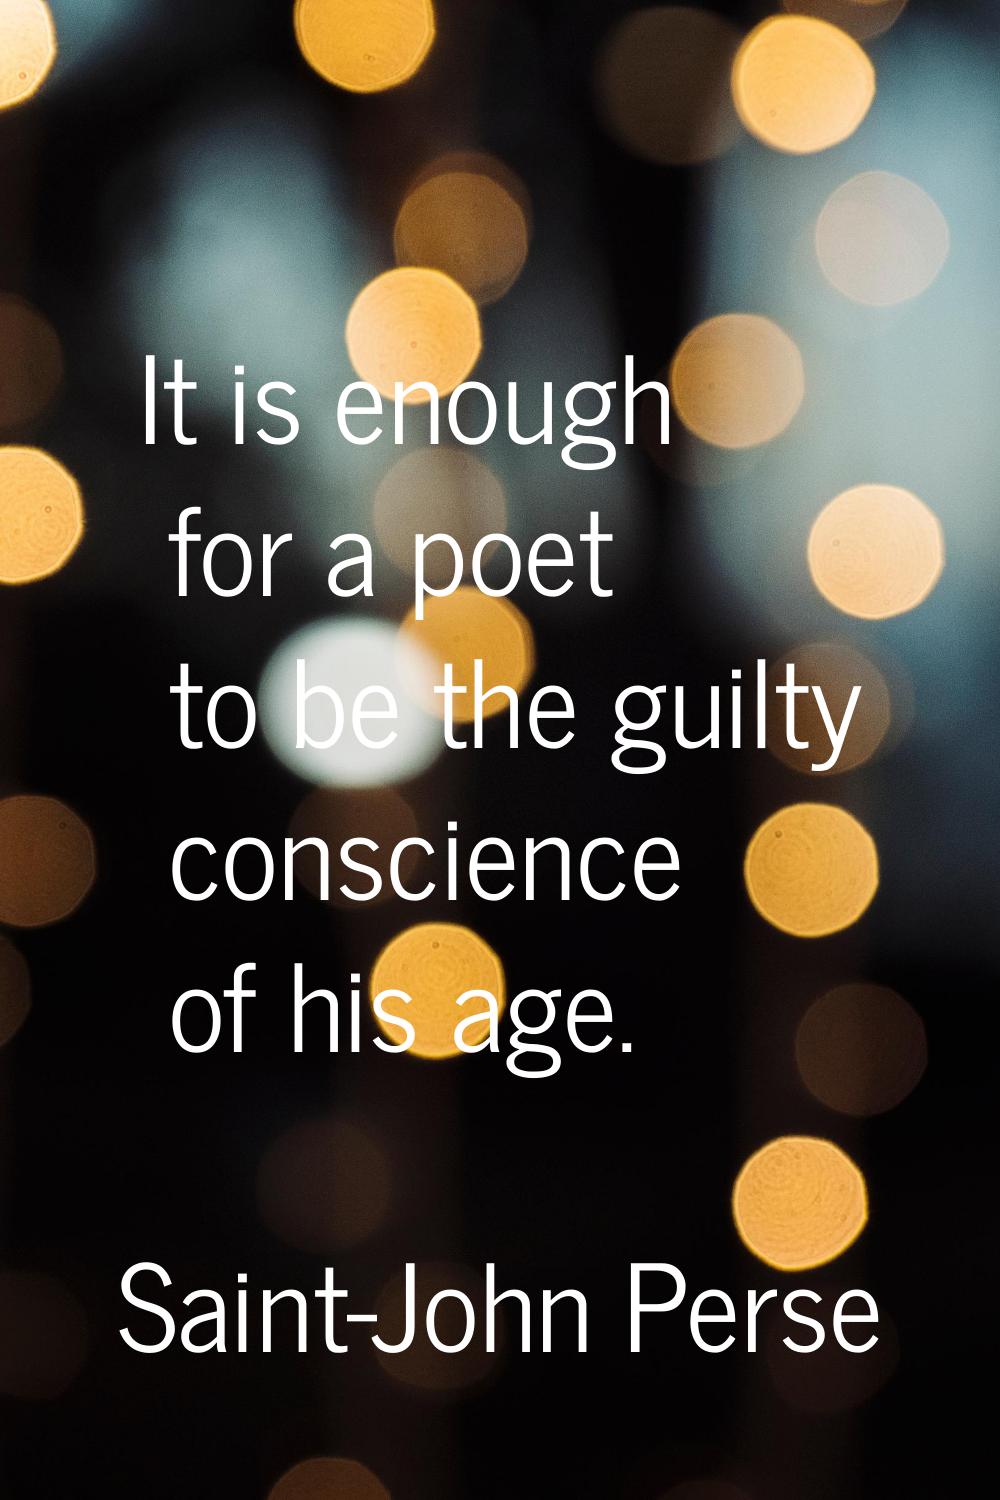 It is enough for a poet to be the guilty conscience of his age.